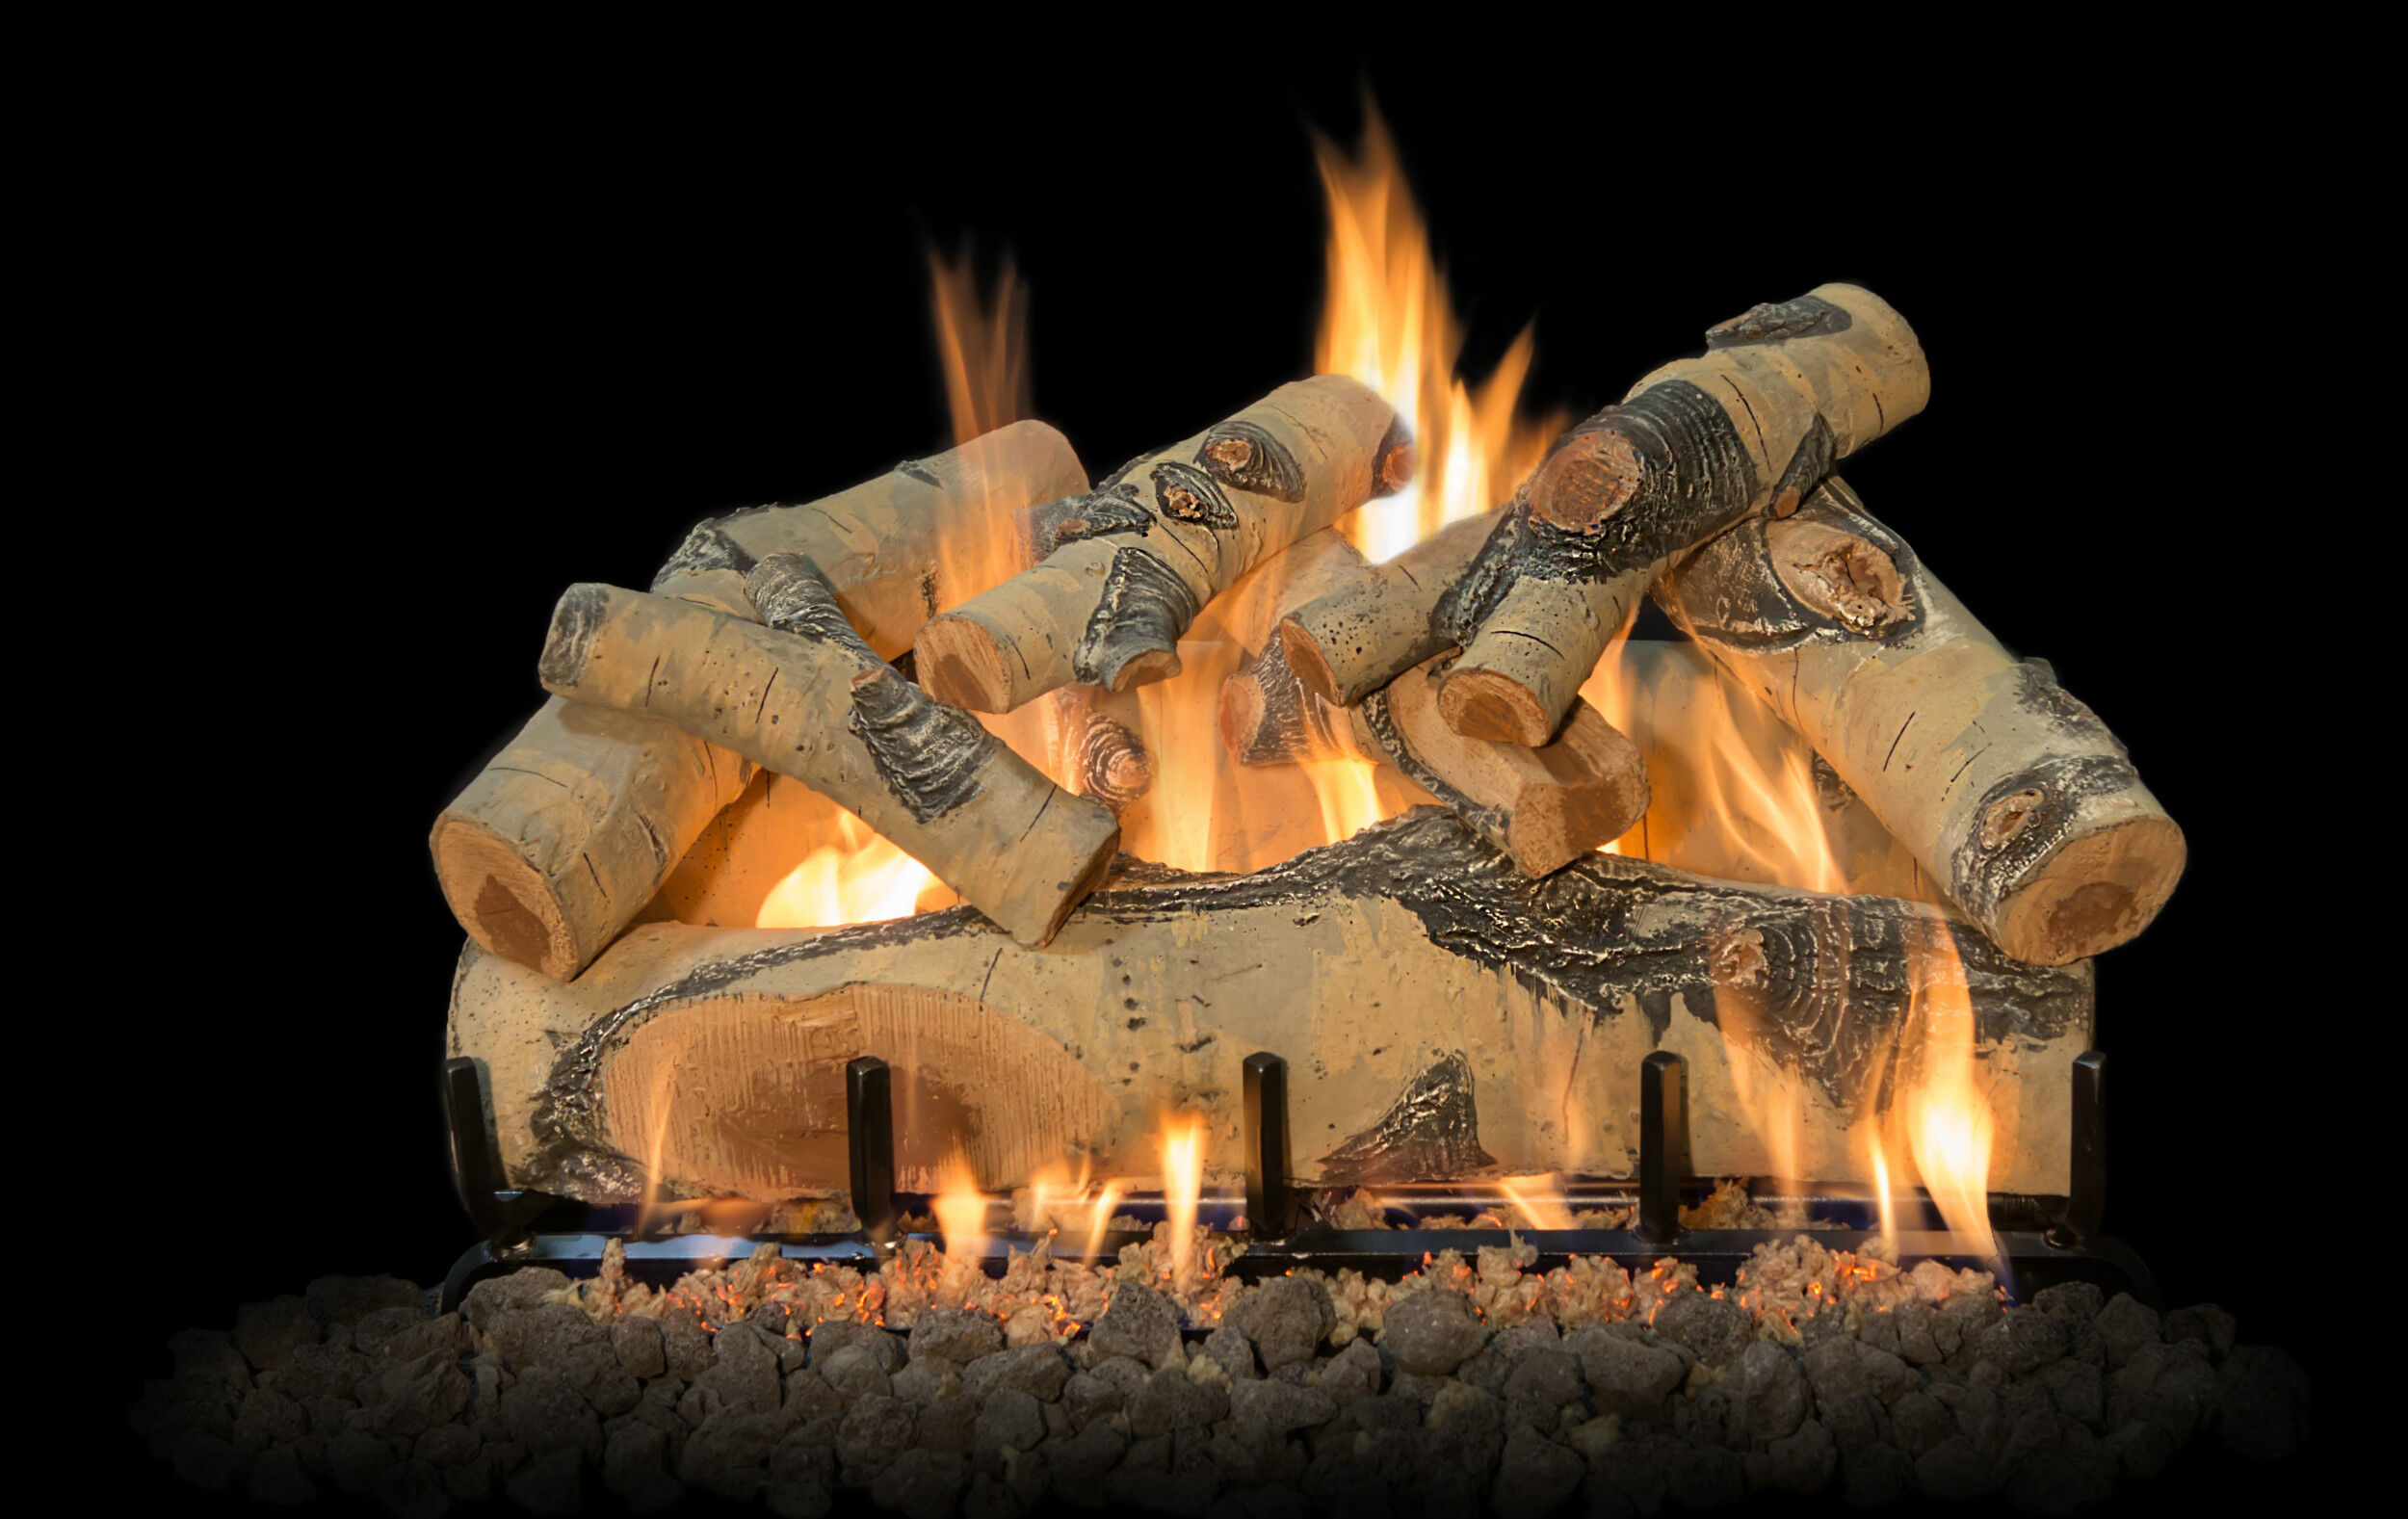 Gas Logs Frequently Asked Questions, Can I Use Flexible Gas Line For Fireplace